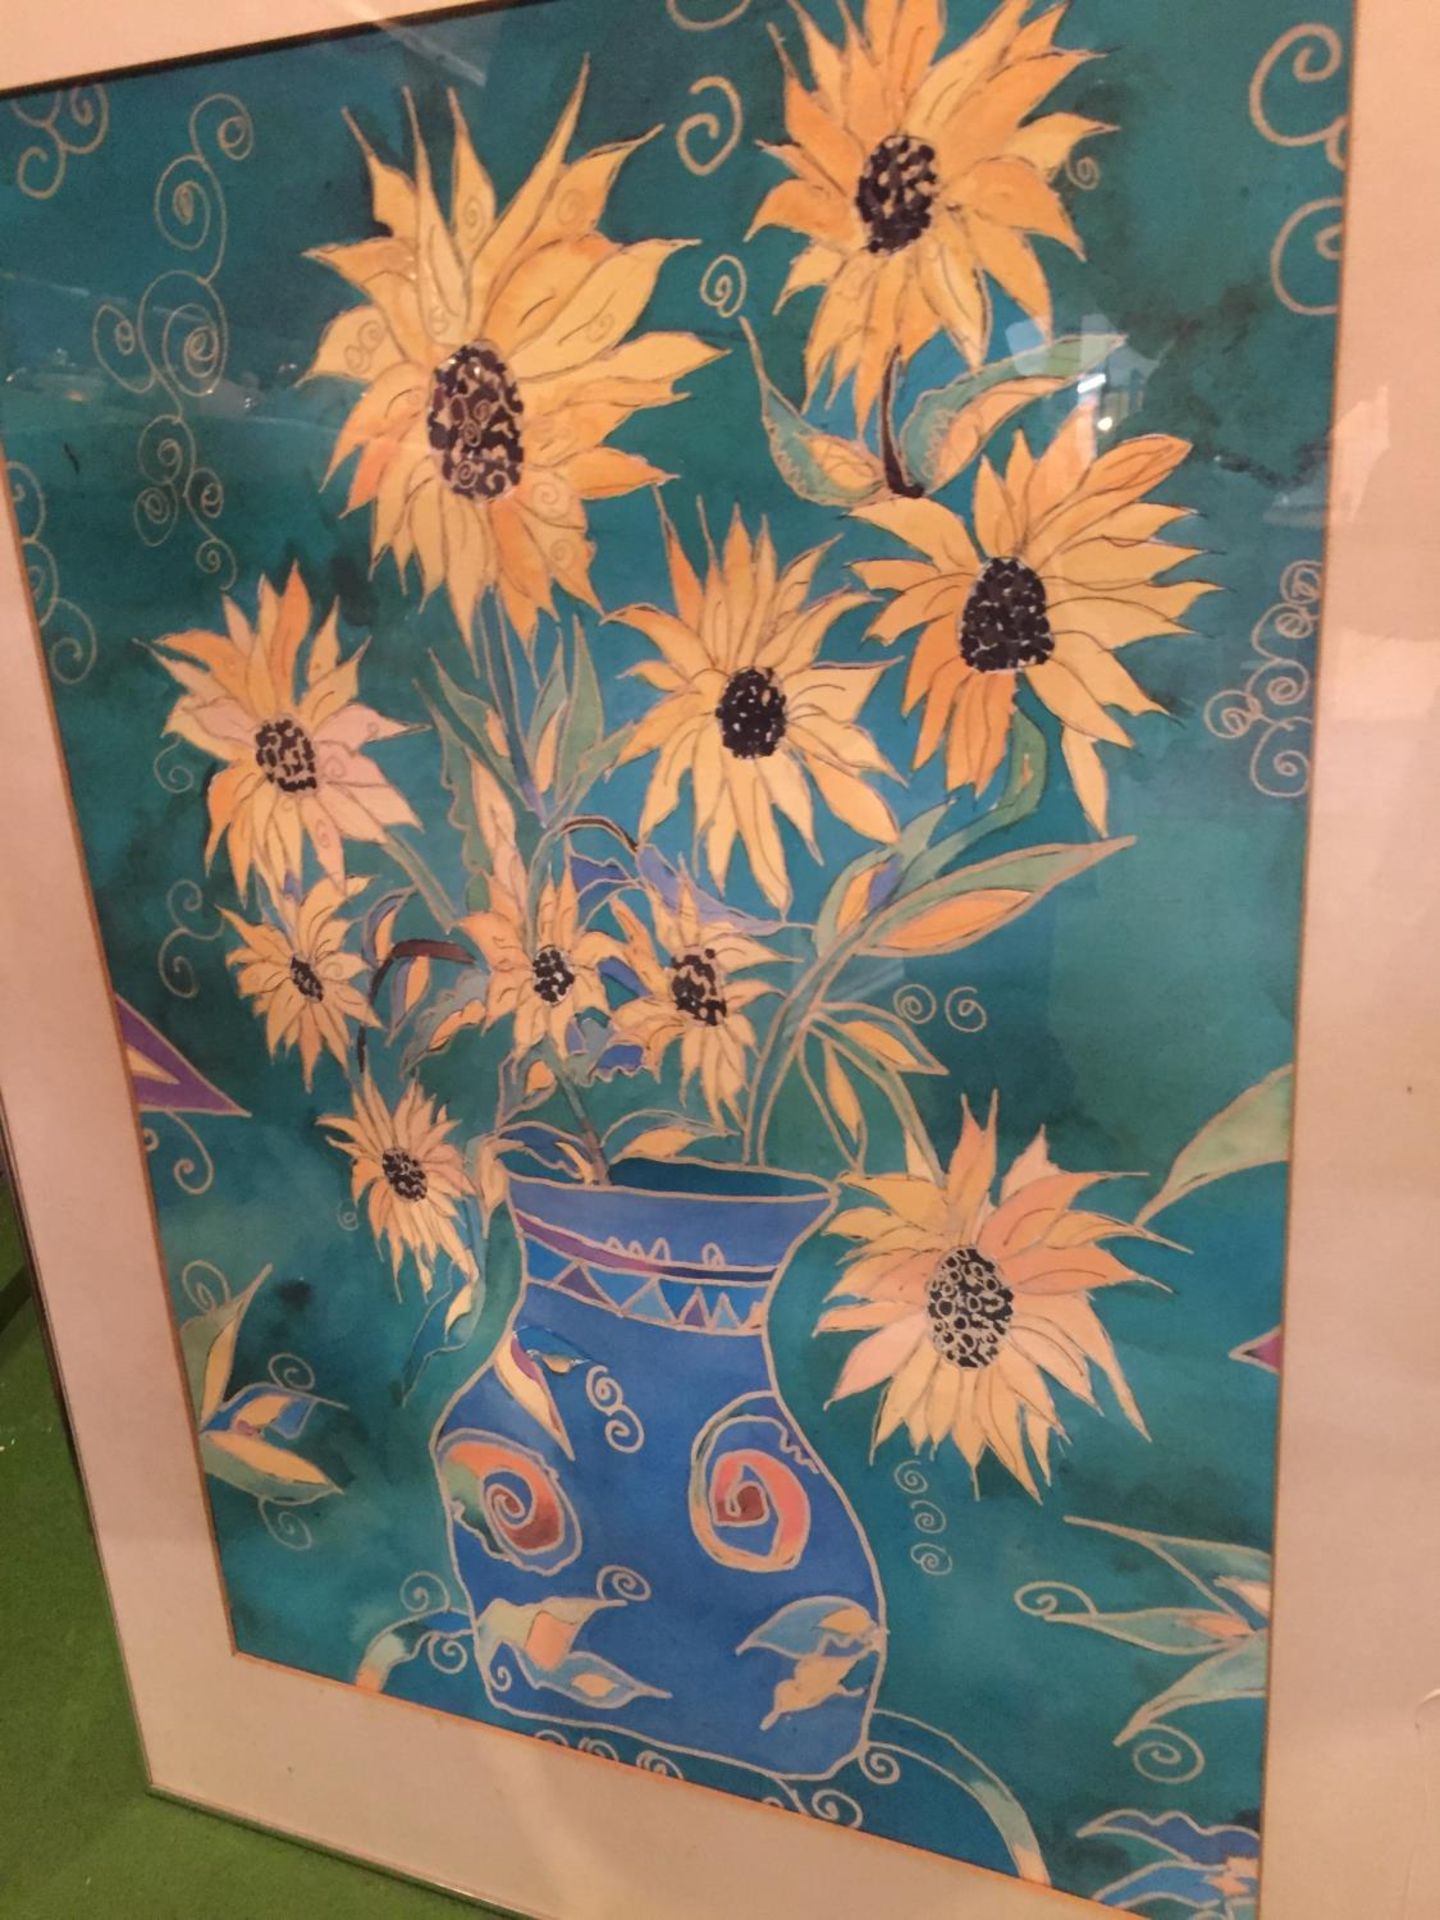 A LARGE FRAMED PRINT OF SUNFLOWERS IN A VASE - Image 3 of 6